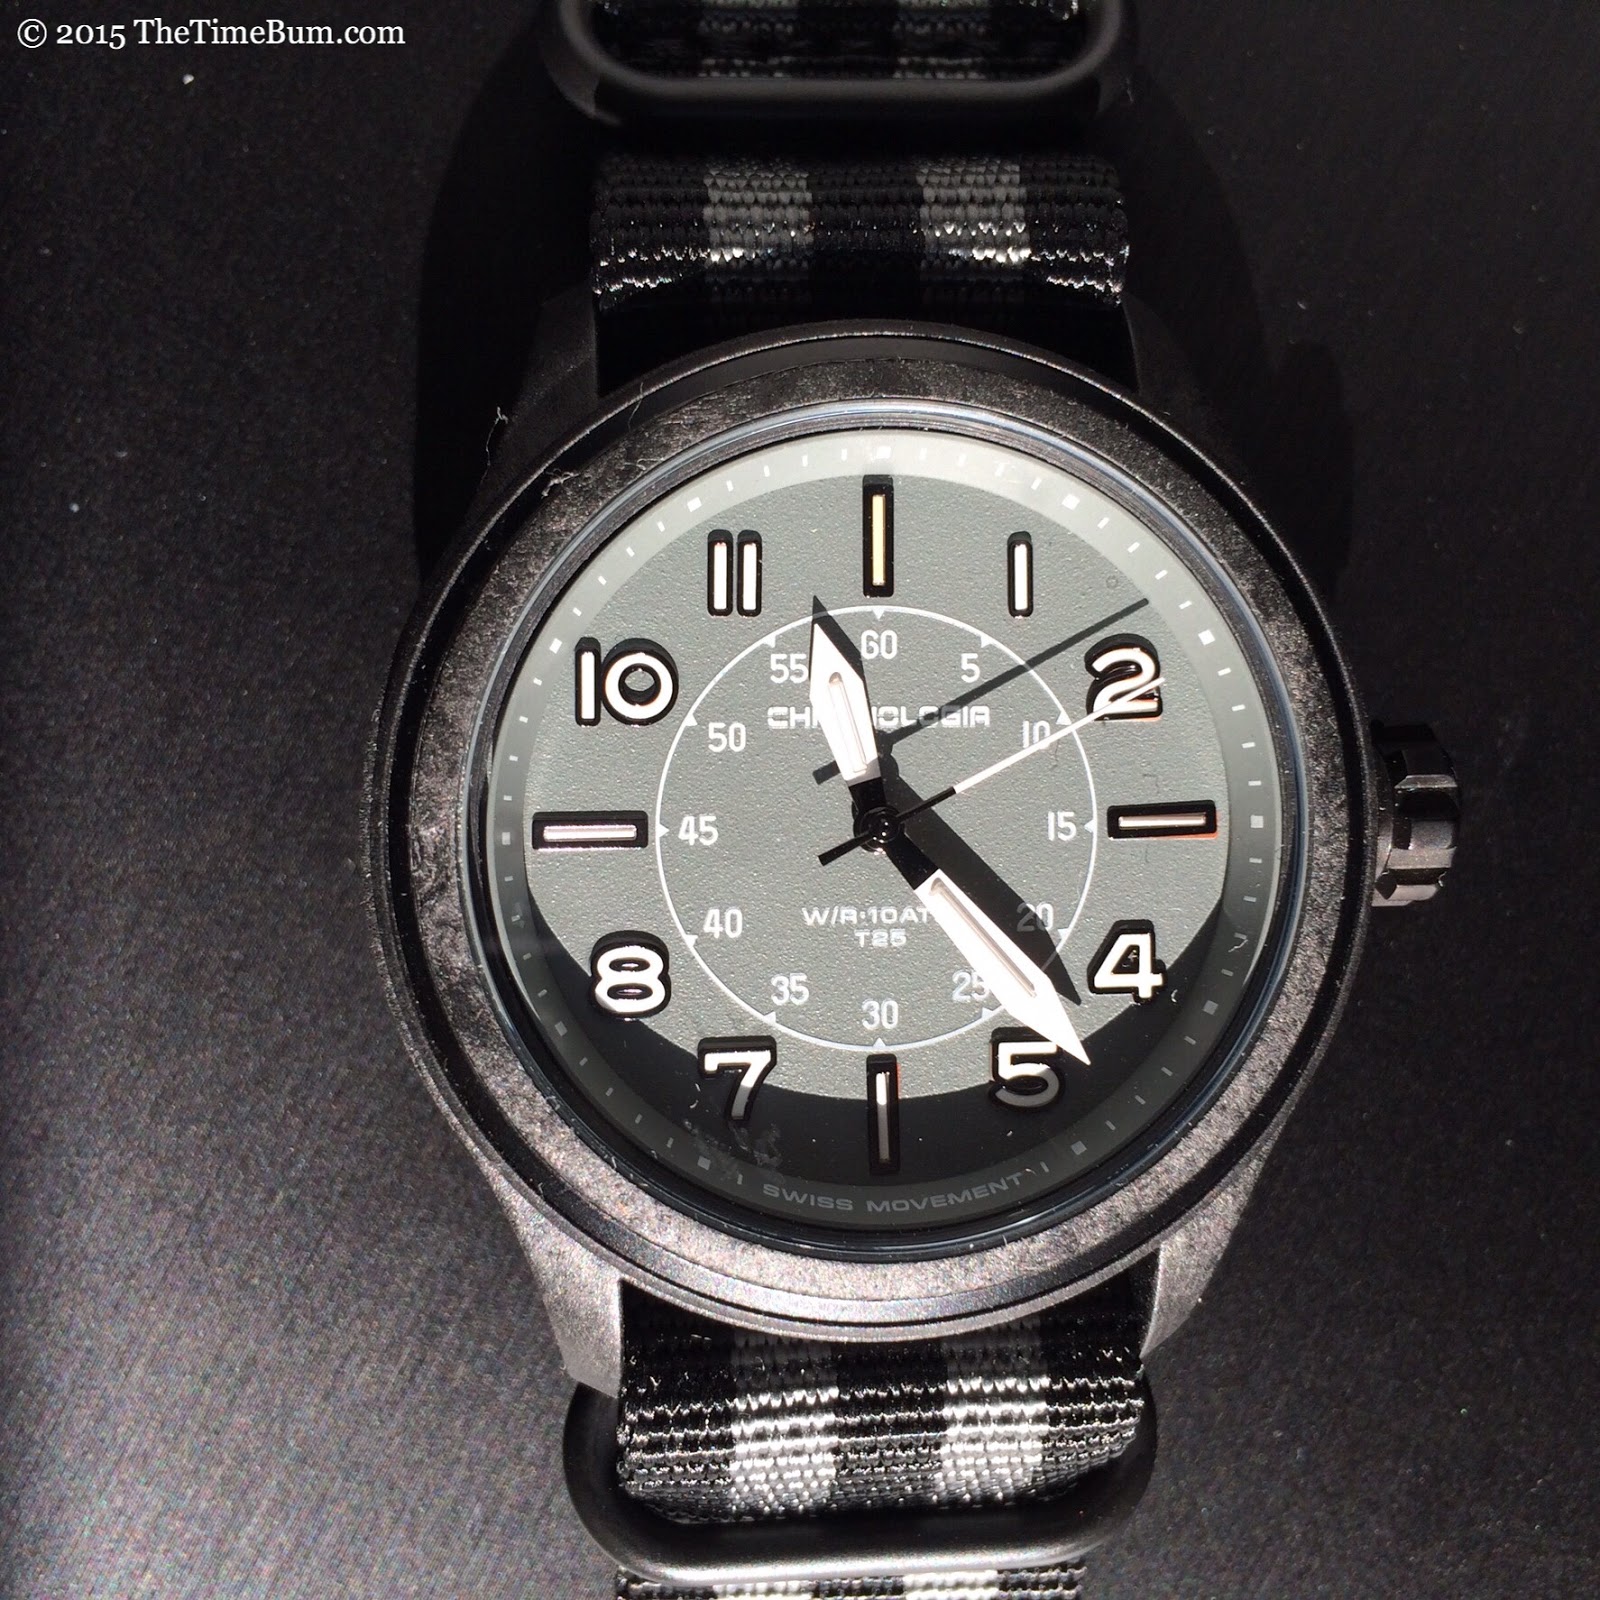 Giveaway: Chronologia Pilot Watch